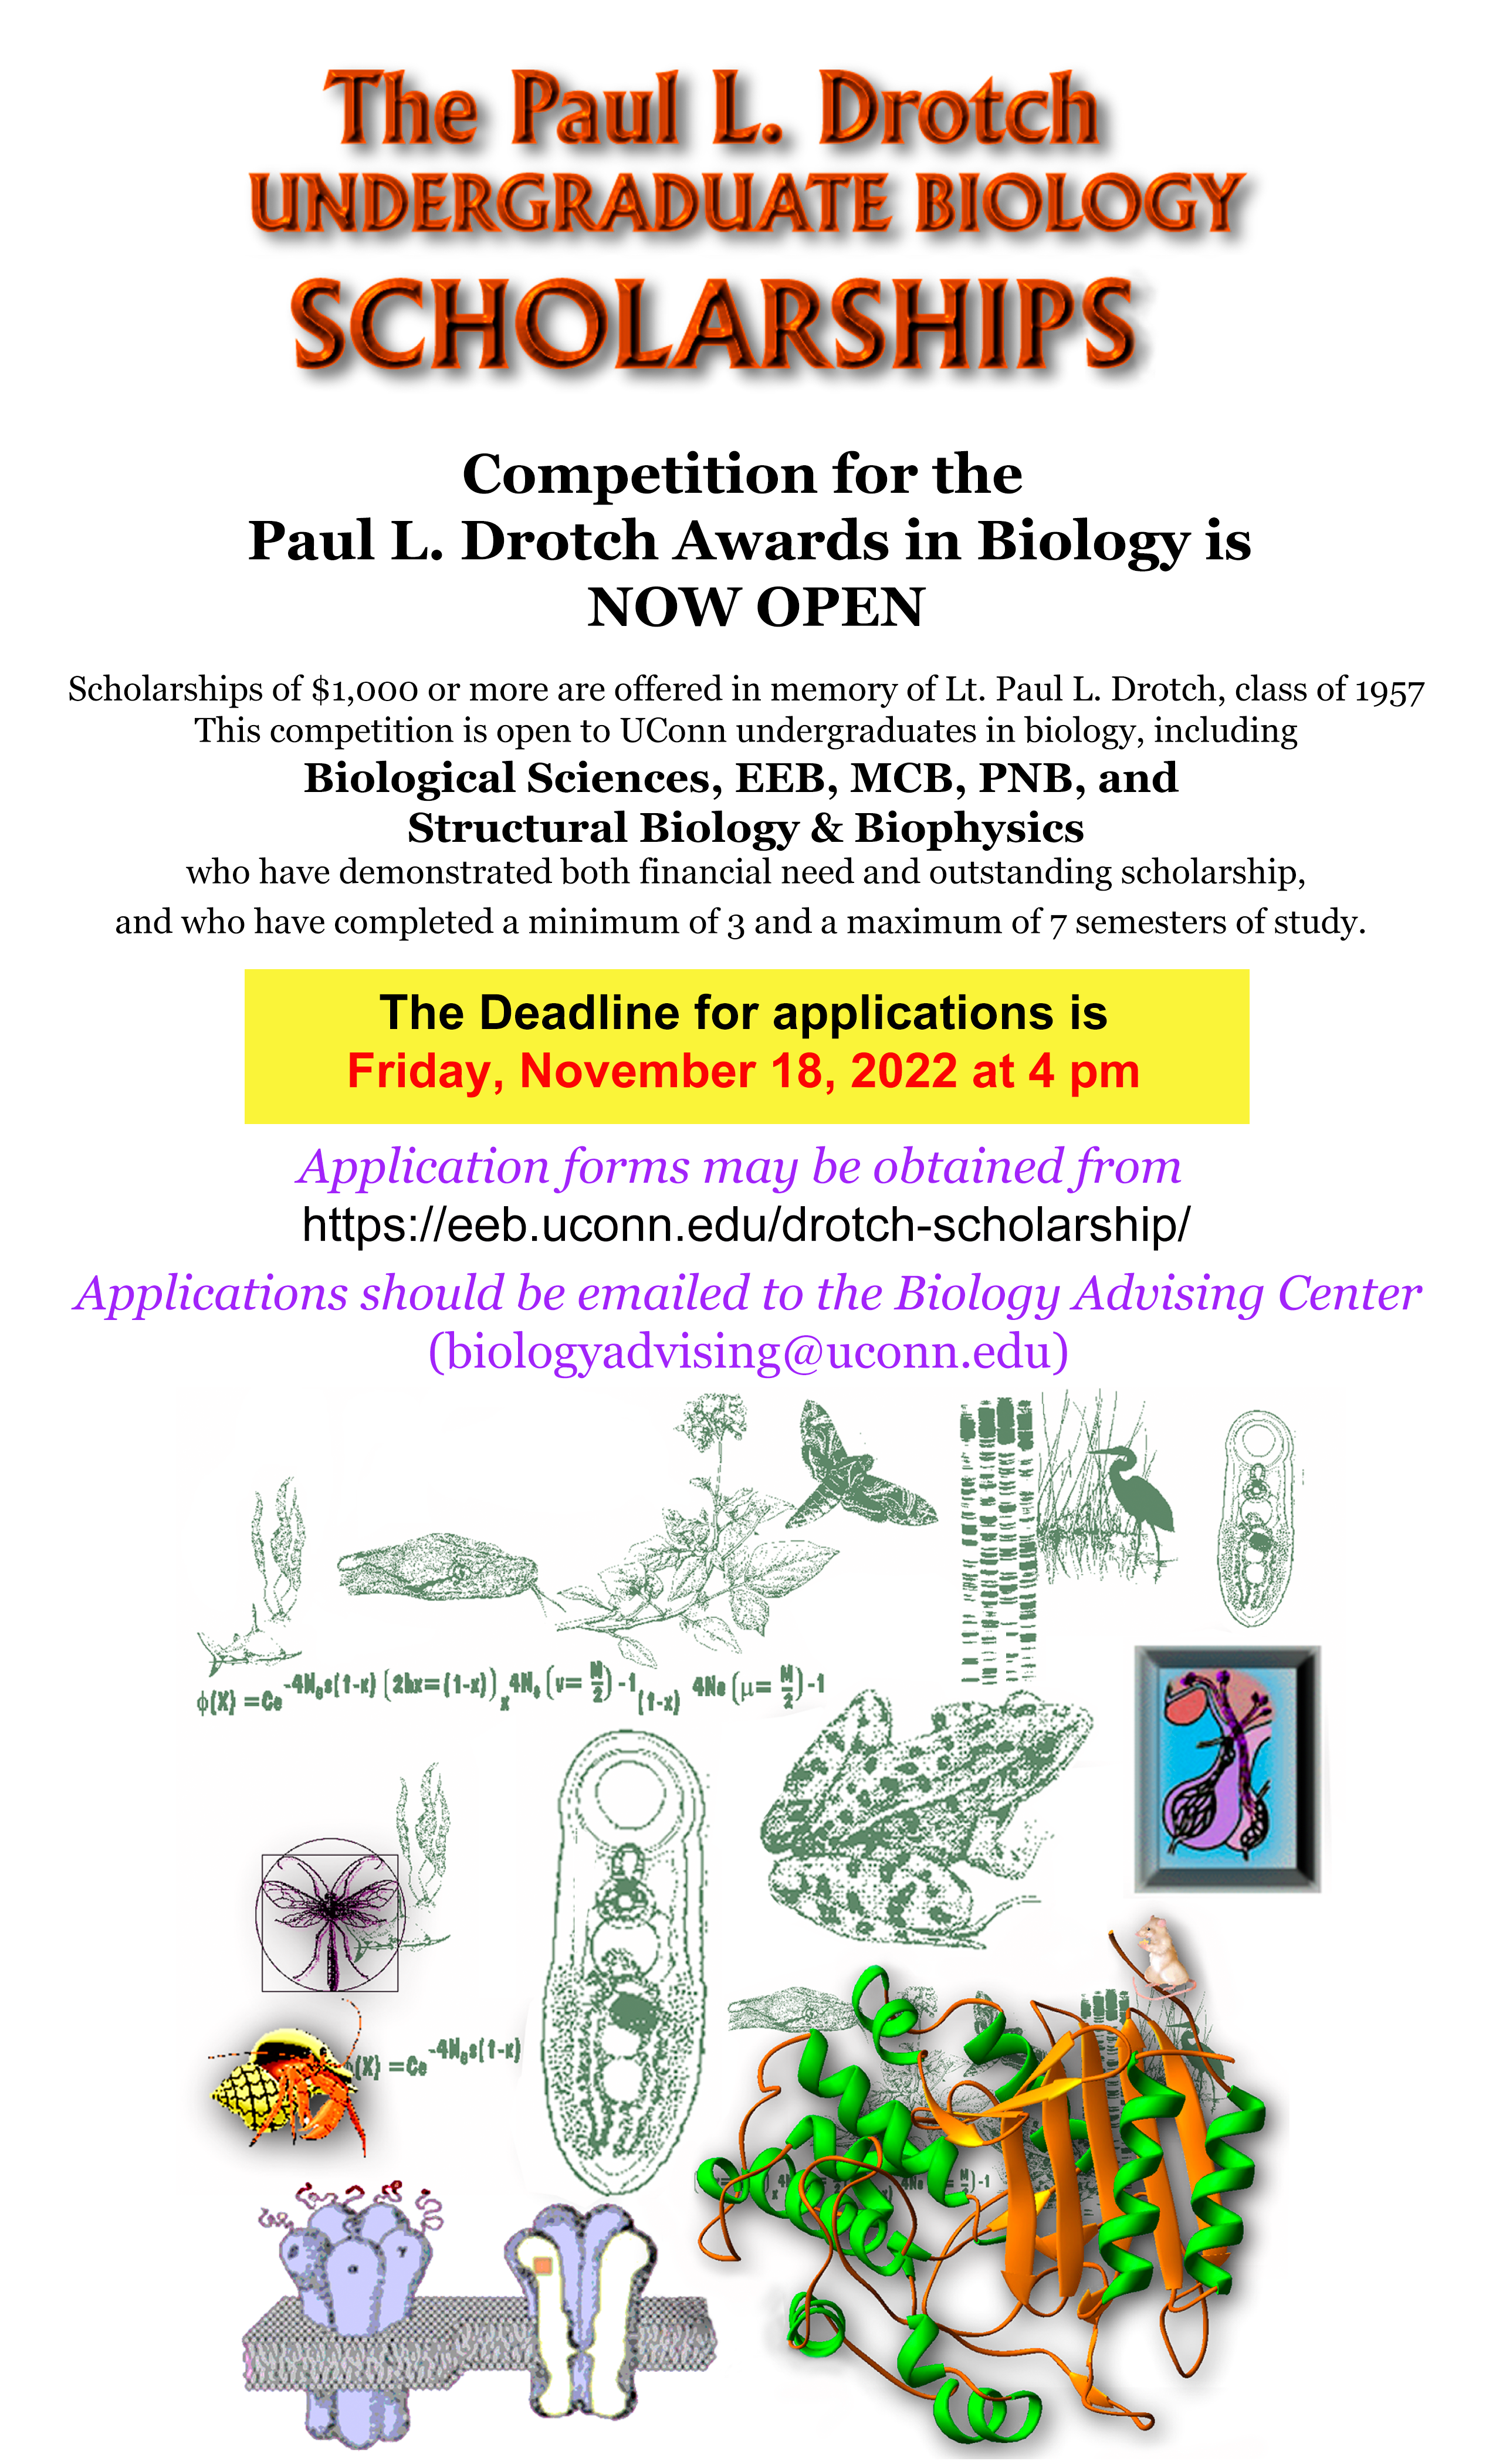 Paul L. Drotch Undergraduate Biology Scholarship. Download application form from this page, fill it out, and send to biologyadvising@uconn.edu.